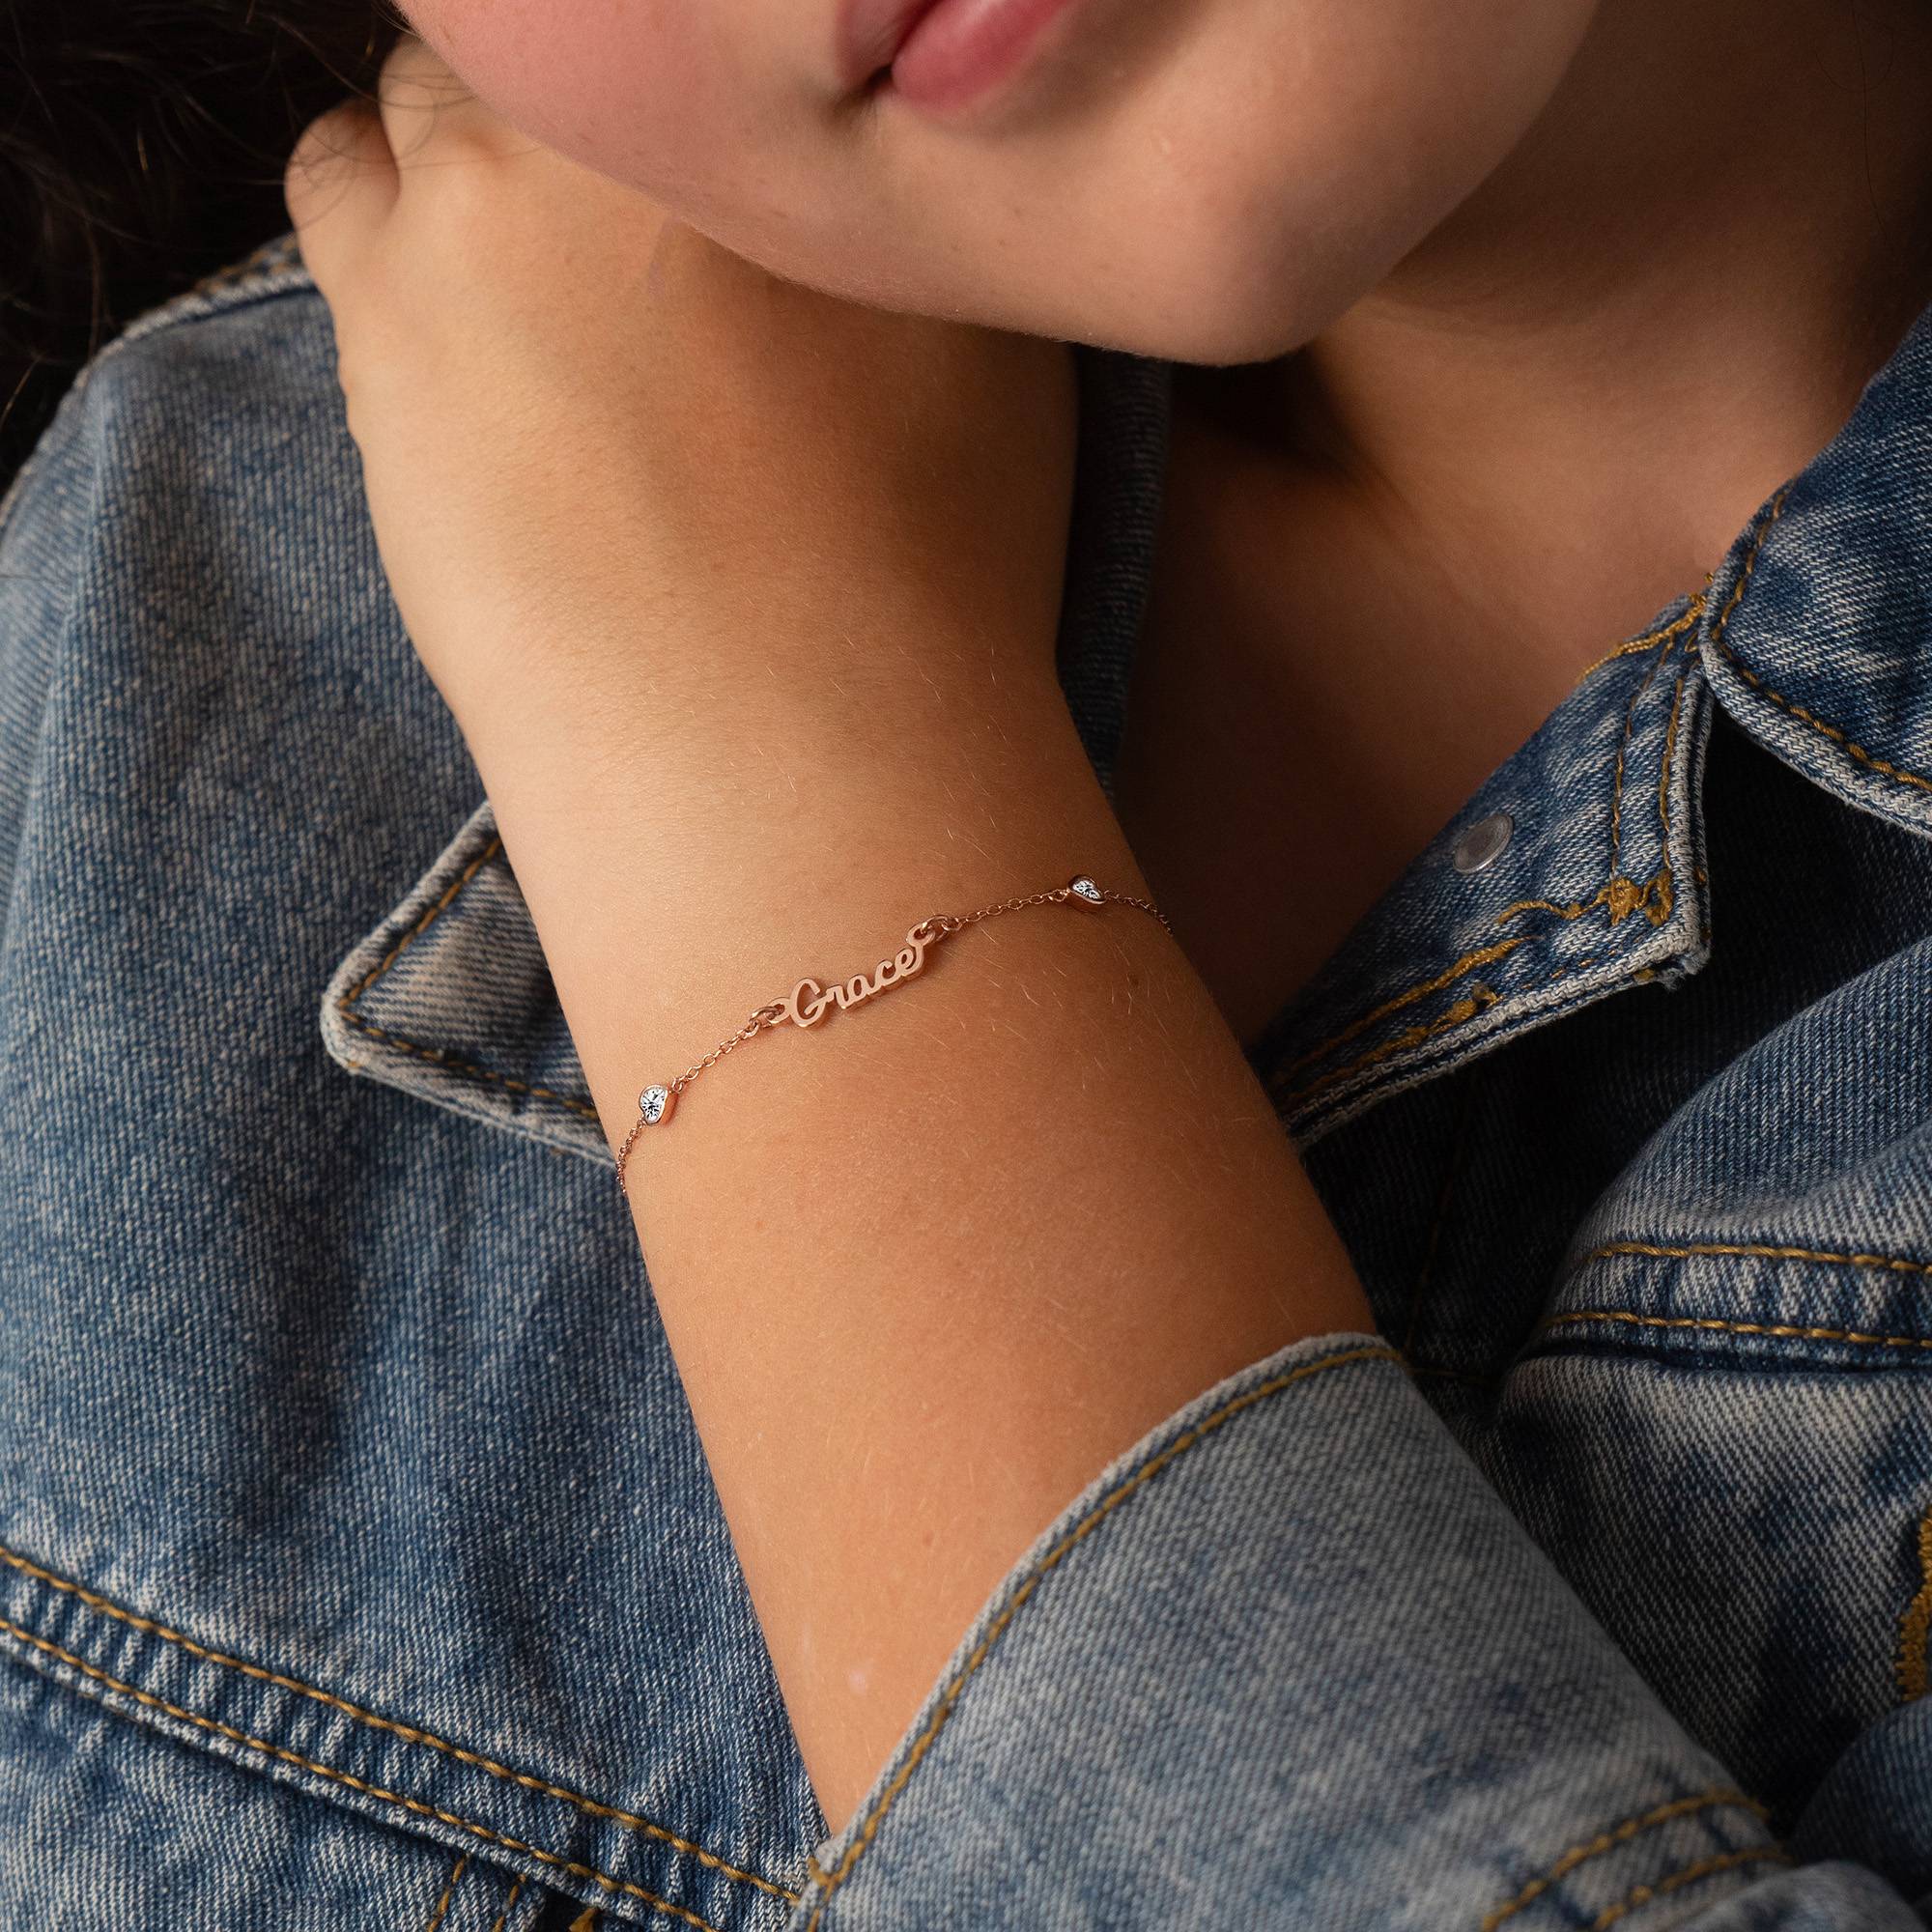 Charli Heart Chain Name Bracelet in 18ct Rose Gold Plating-1 product photo